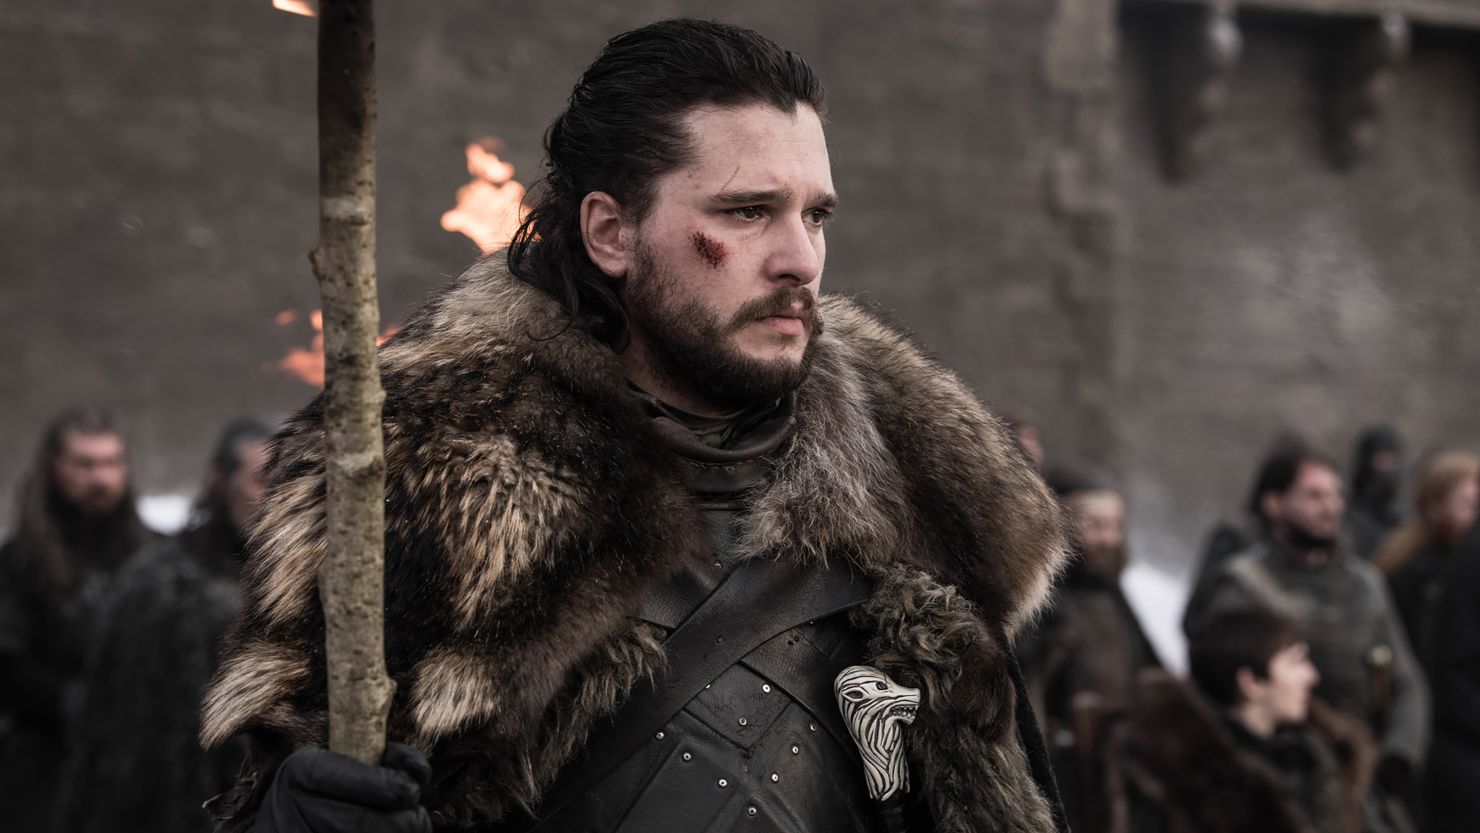 How Much Money Has HBO Made from Game of Thrones?